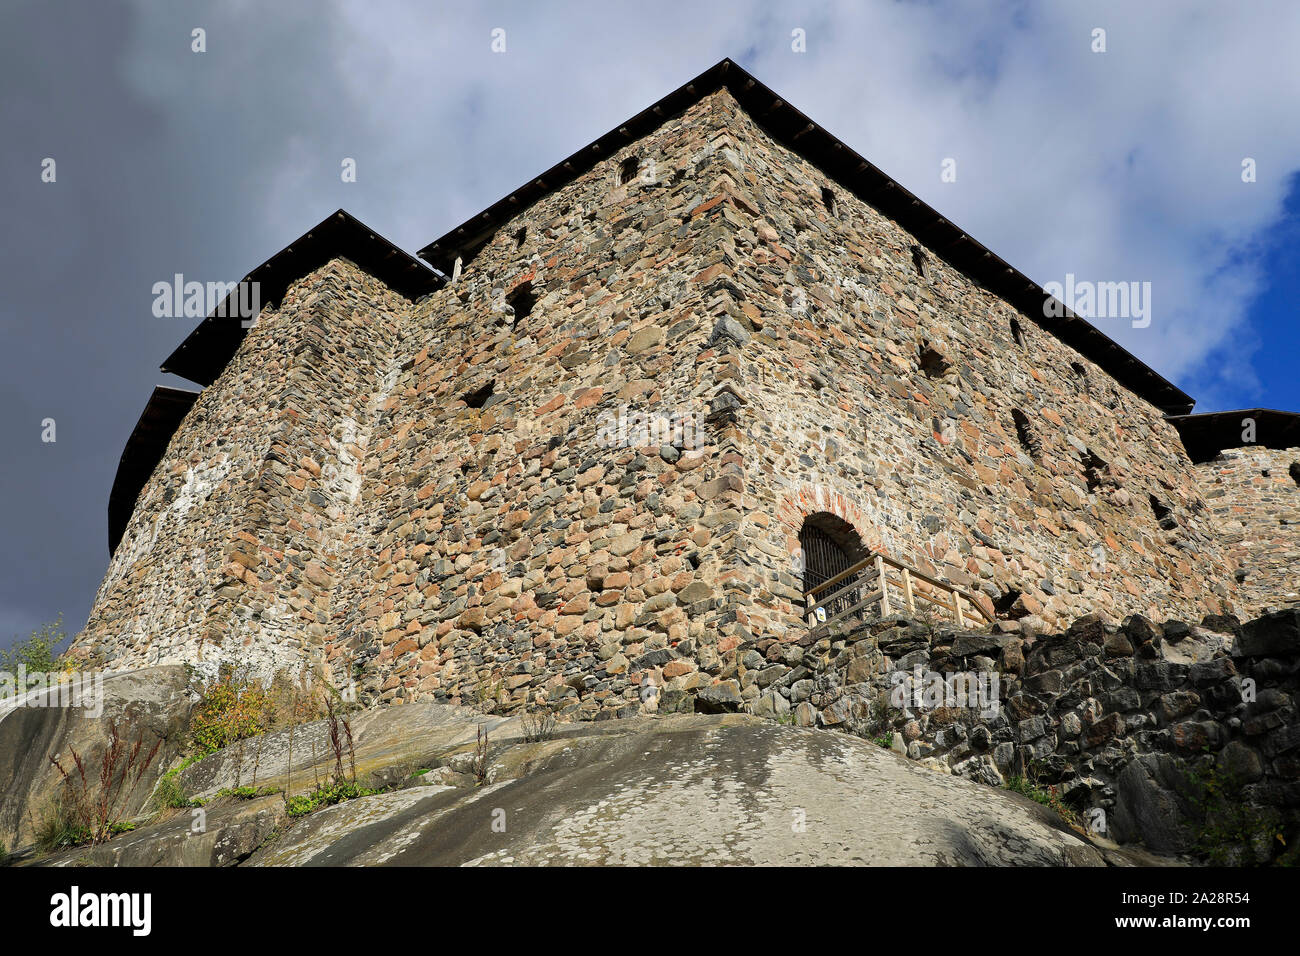 Medieval Raseborg Castle Ruins against sky, detail. Raseborg Castle was built in 1370s on a rock that was surrounded by water at the time. Stock Photo